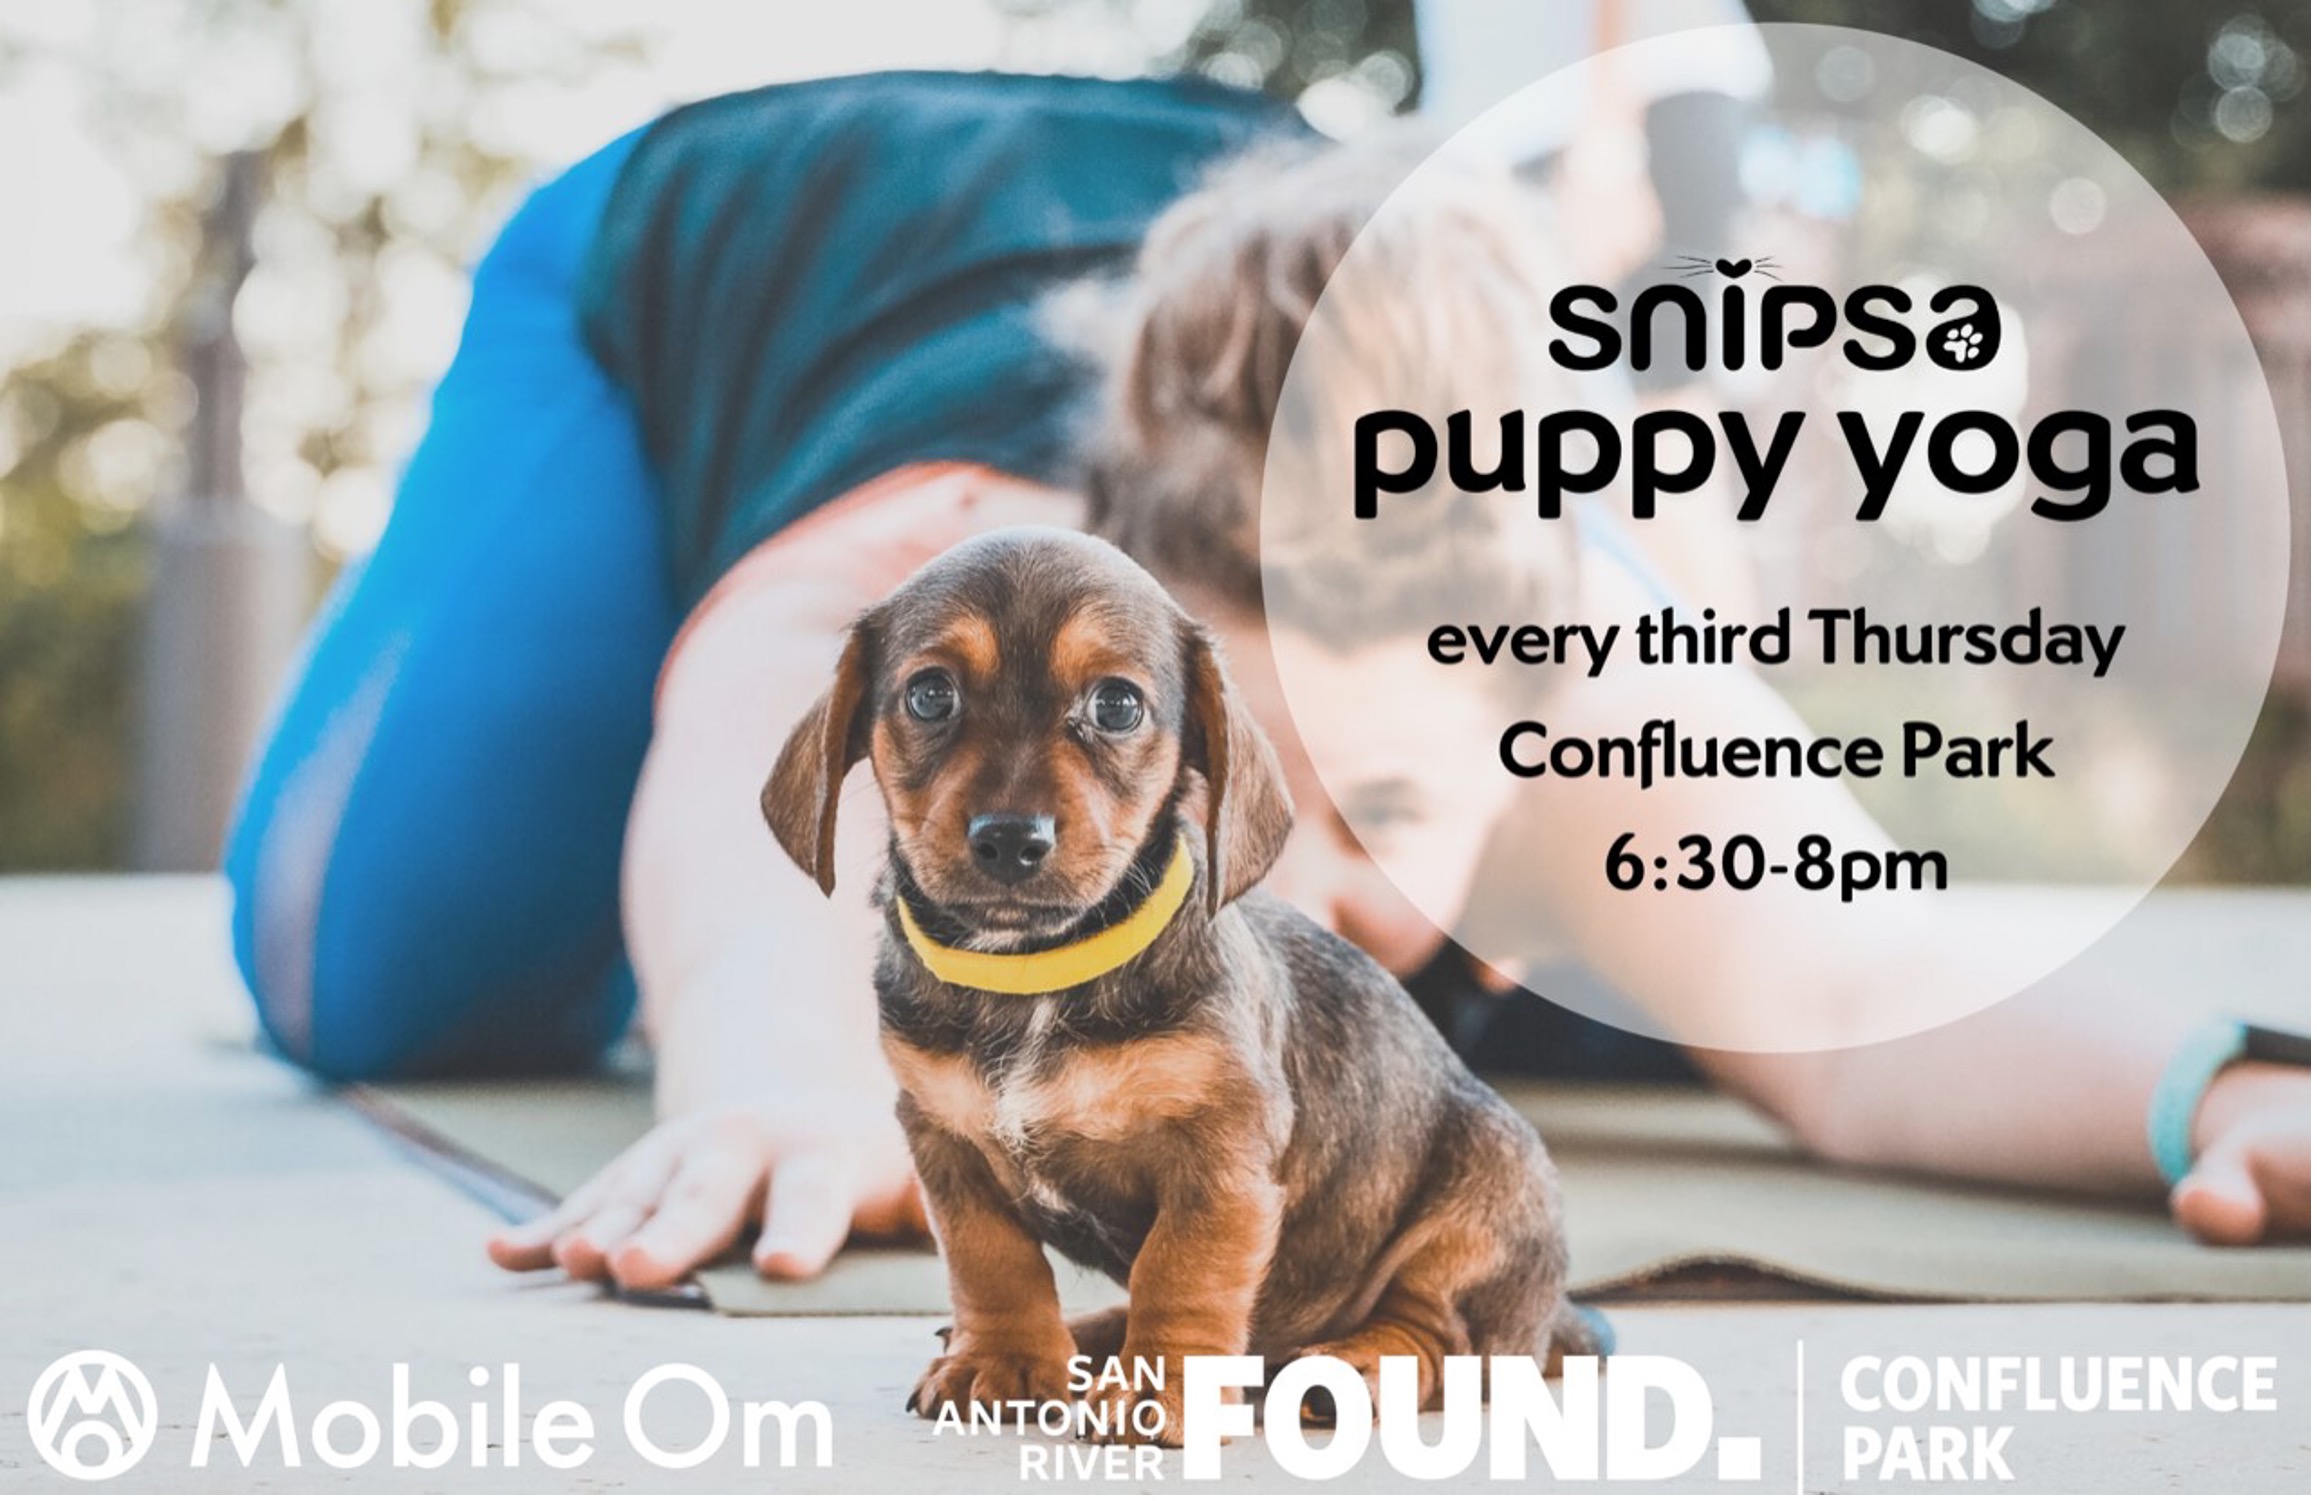 SNIPSA Puppy Yoga. Every Third Thursday at Confluence Park from 6:30-8PM.